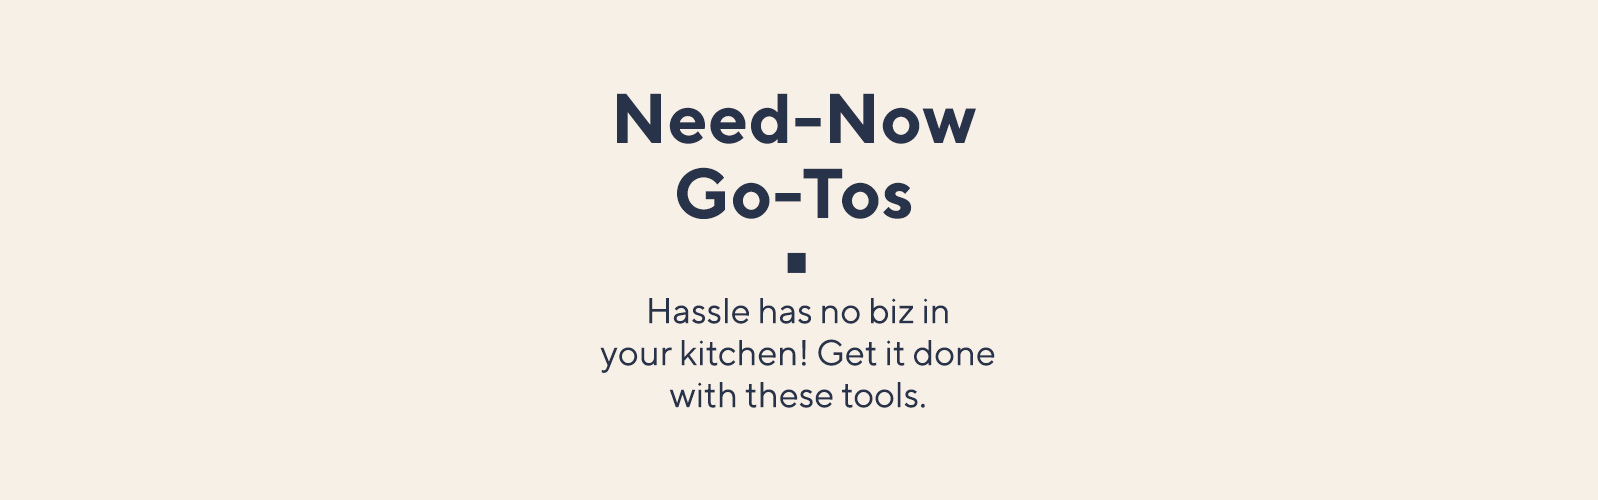 Need-Now Go-Tos.  Hassle has no biz in your kitchen! Get it done with these tools.